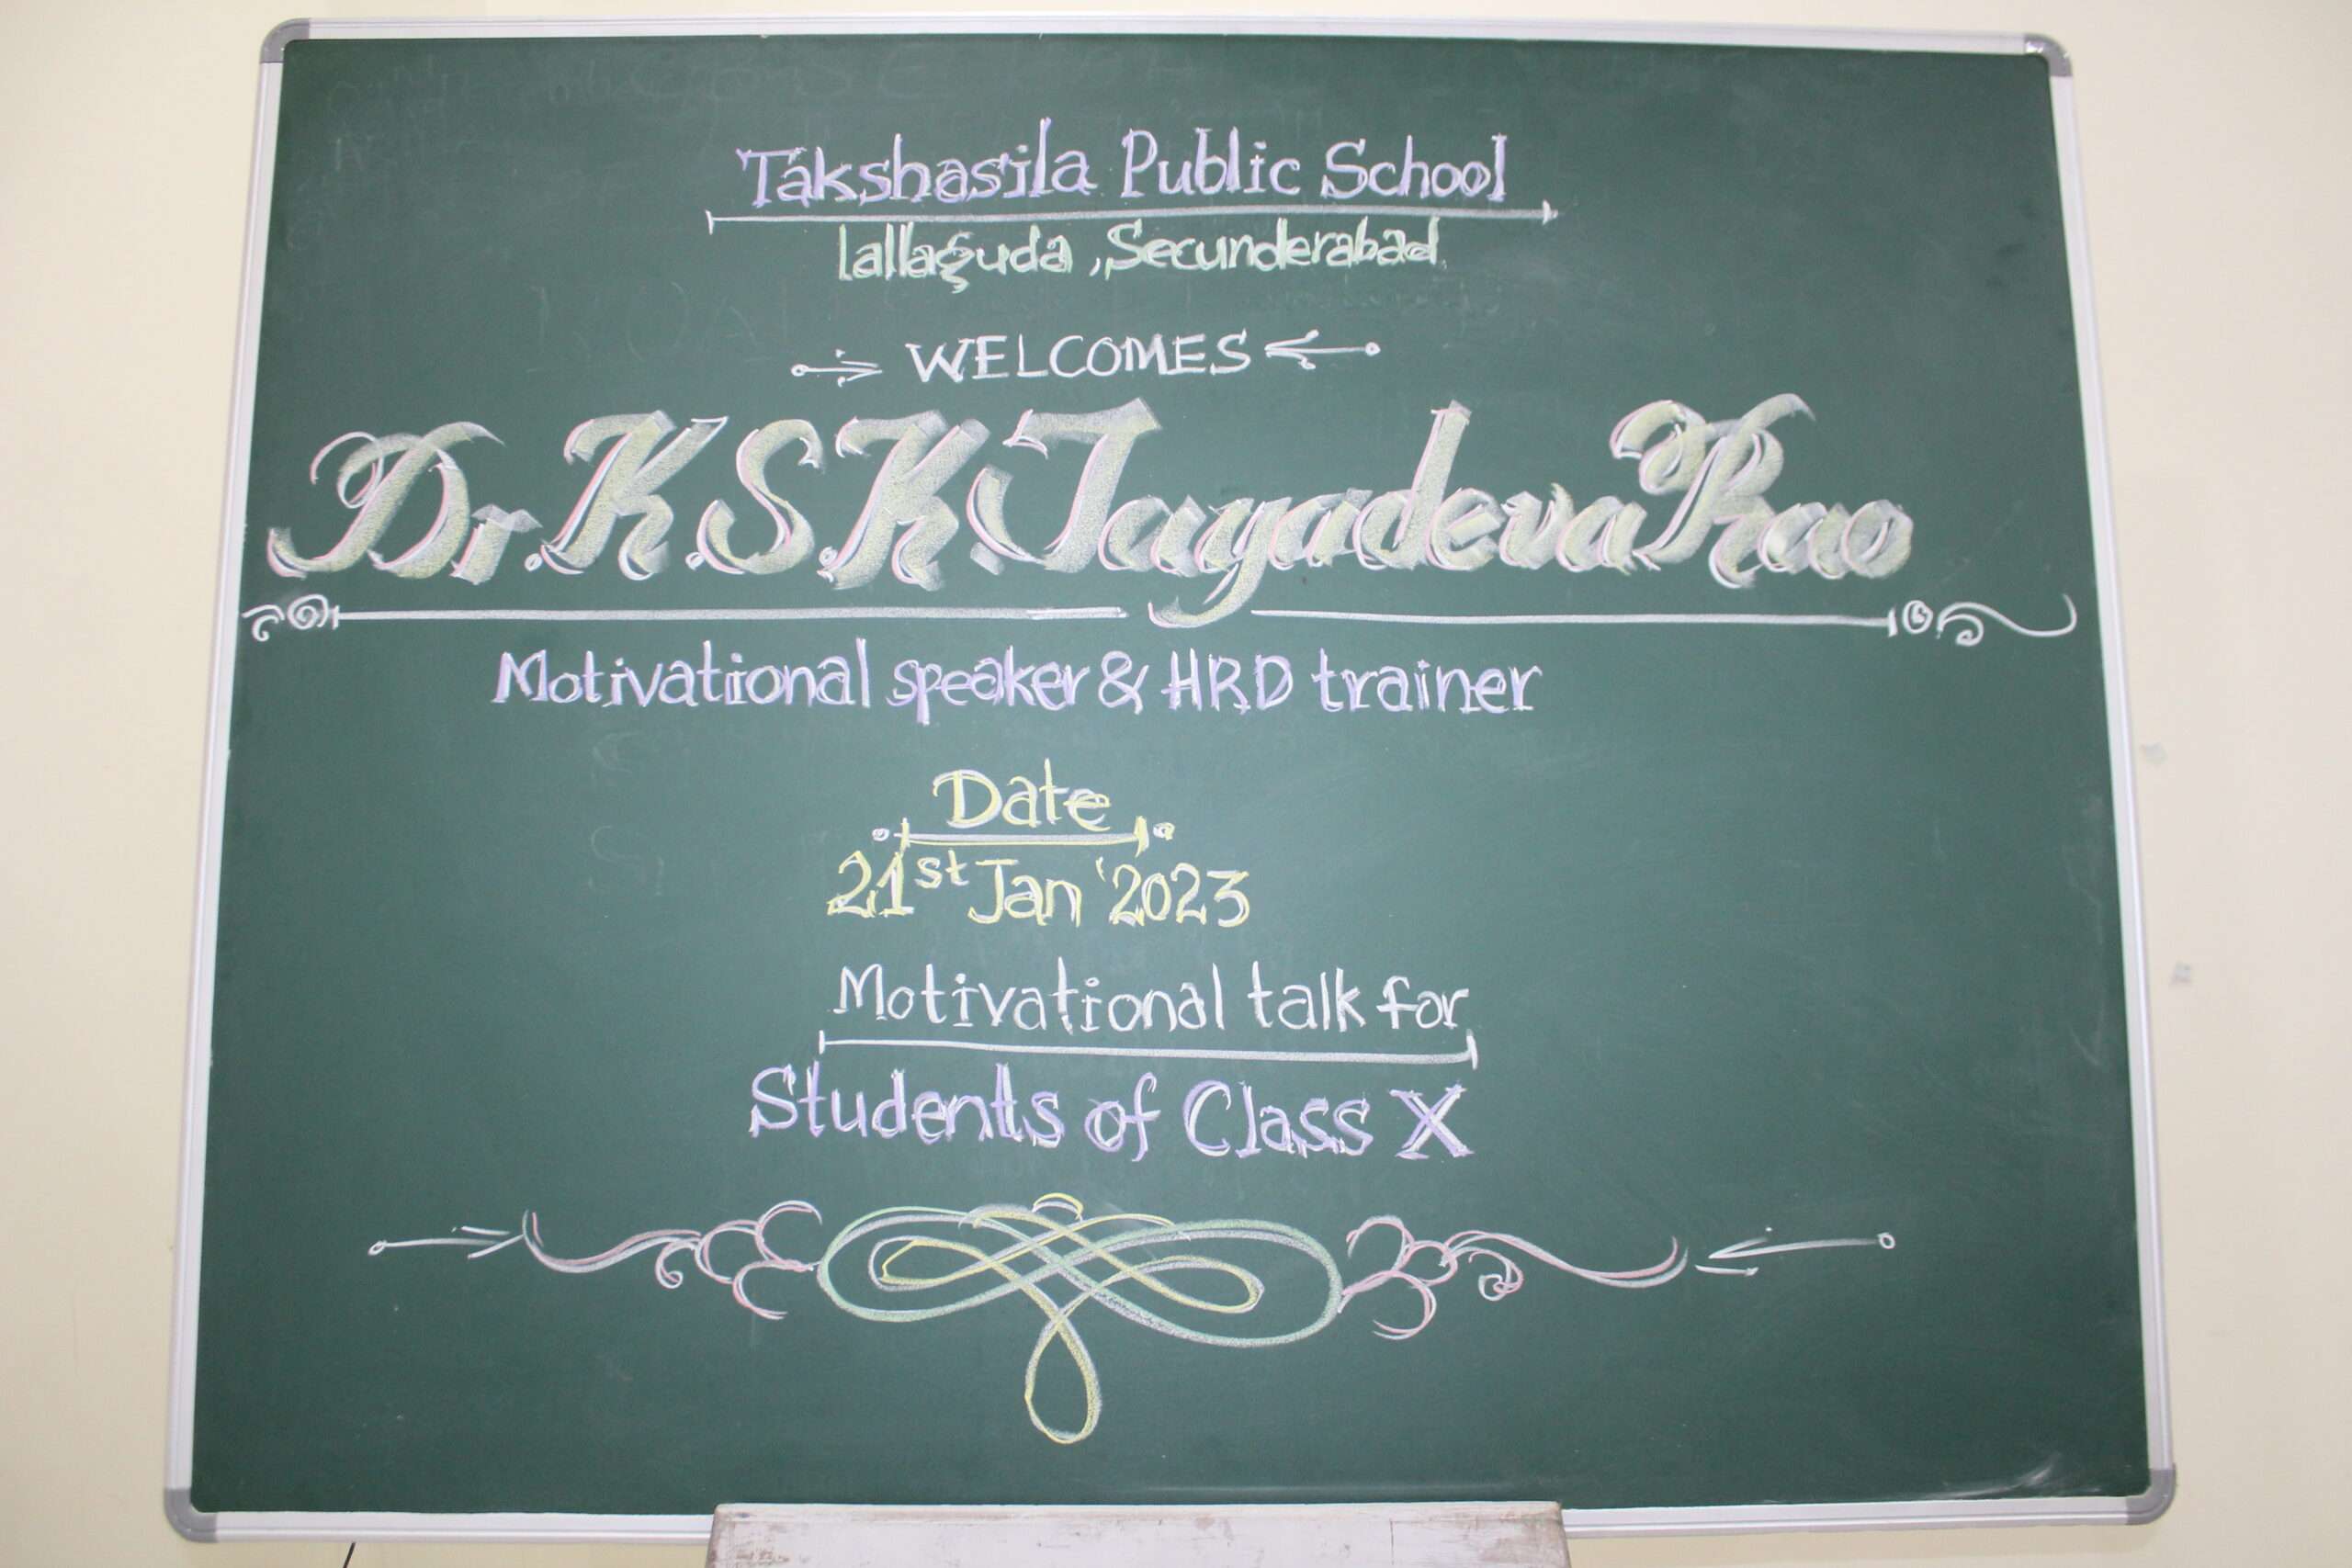 Career Counselling for Class X Students by Mr. K.S.K. JAYADEVA RAO -Motivational Speaker and HRD Trainer.